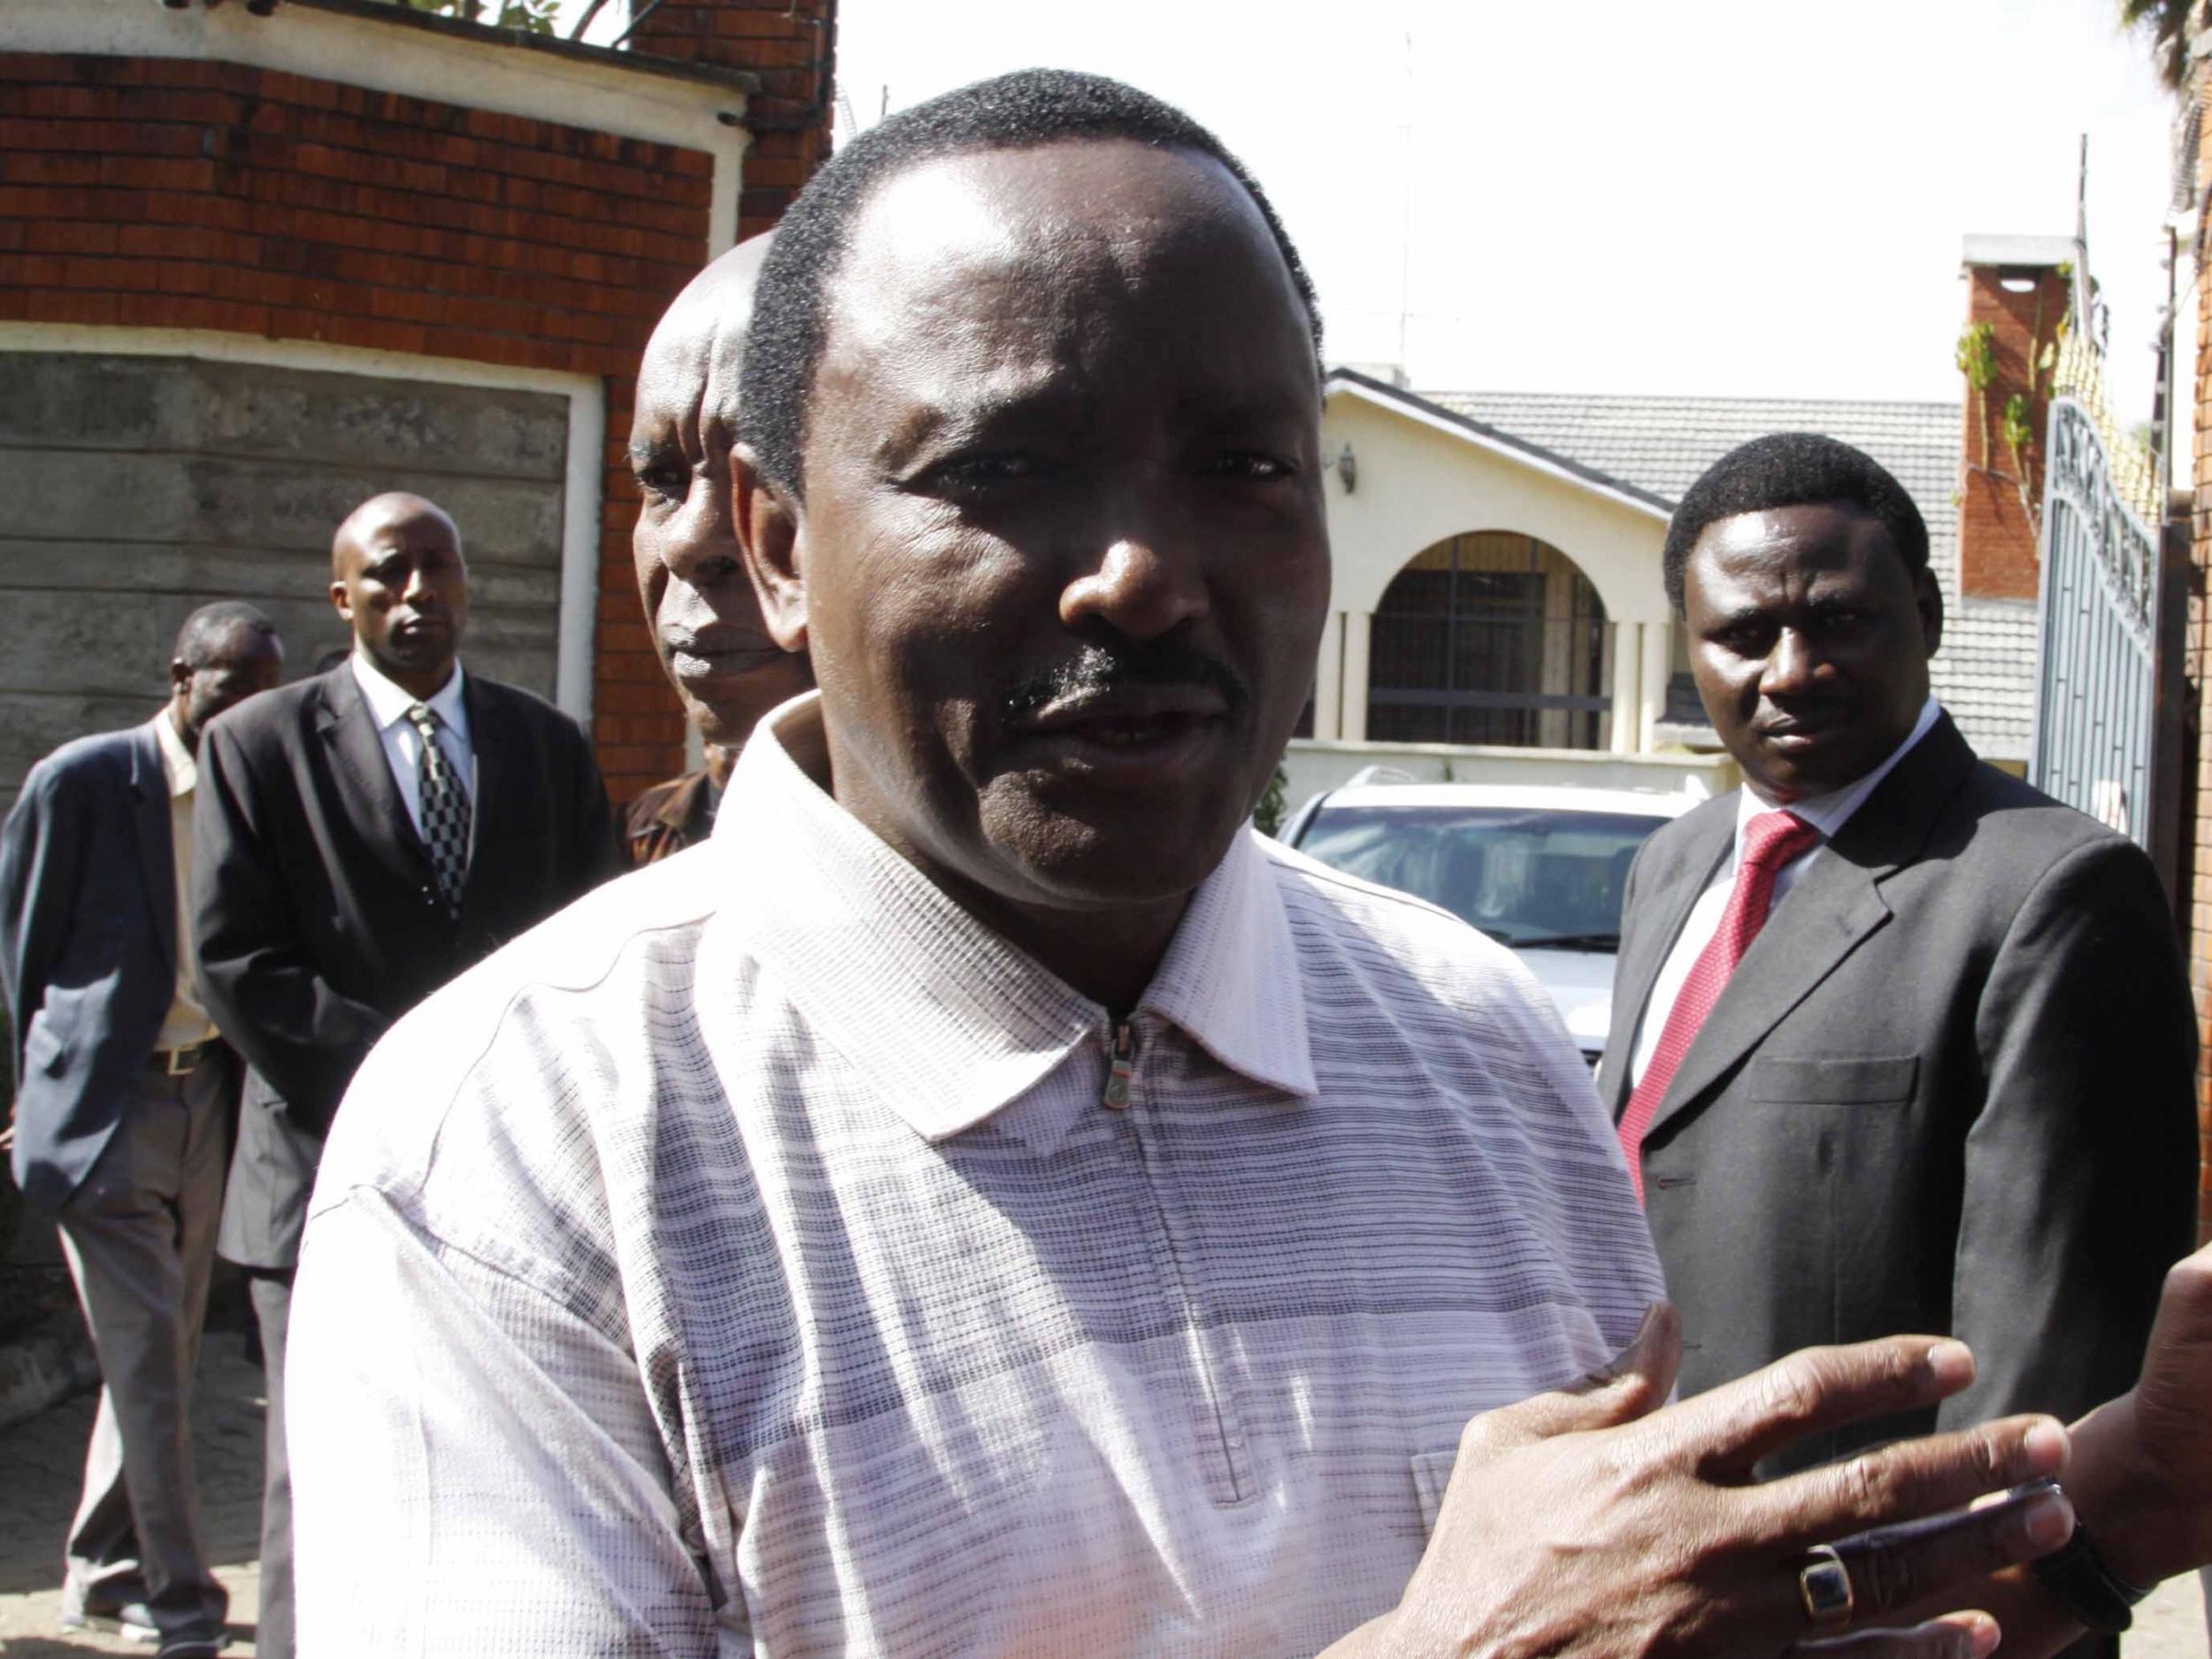 Former Kenyan Vice President Kalonzo Musyoka talks to members of the media outside his home in Nairobi after reporting that an ‘assassination attempt’ was made against him